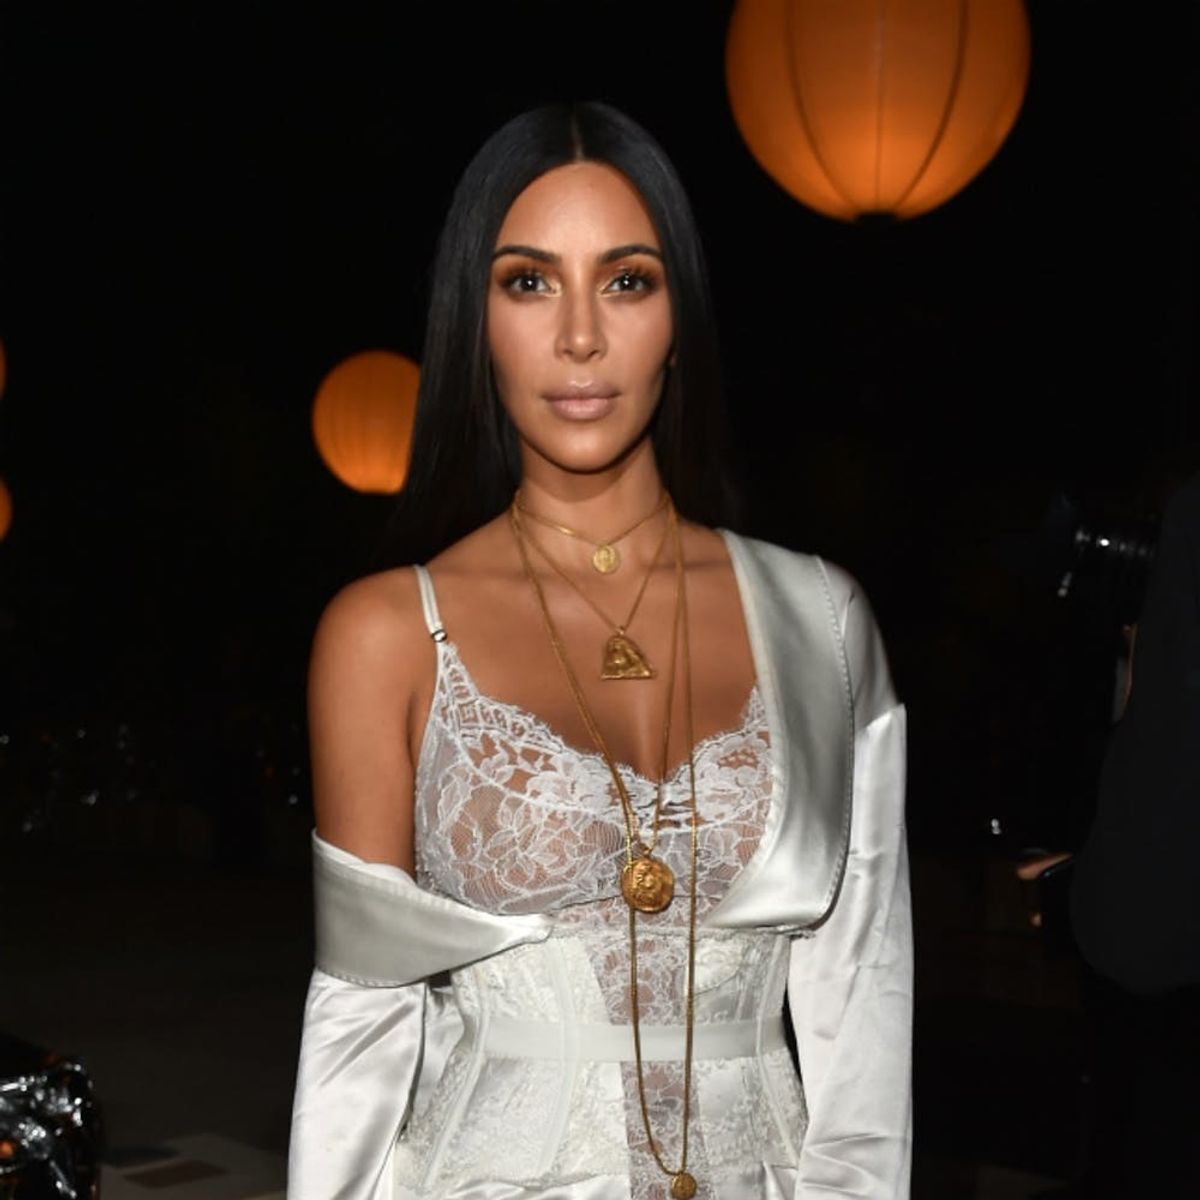 Kim Kardashian’s Assistant Is Breaking Her Silence on the Paris Robbery